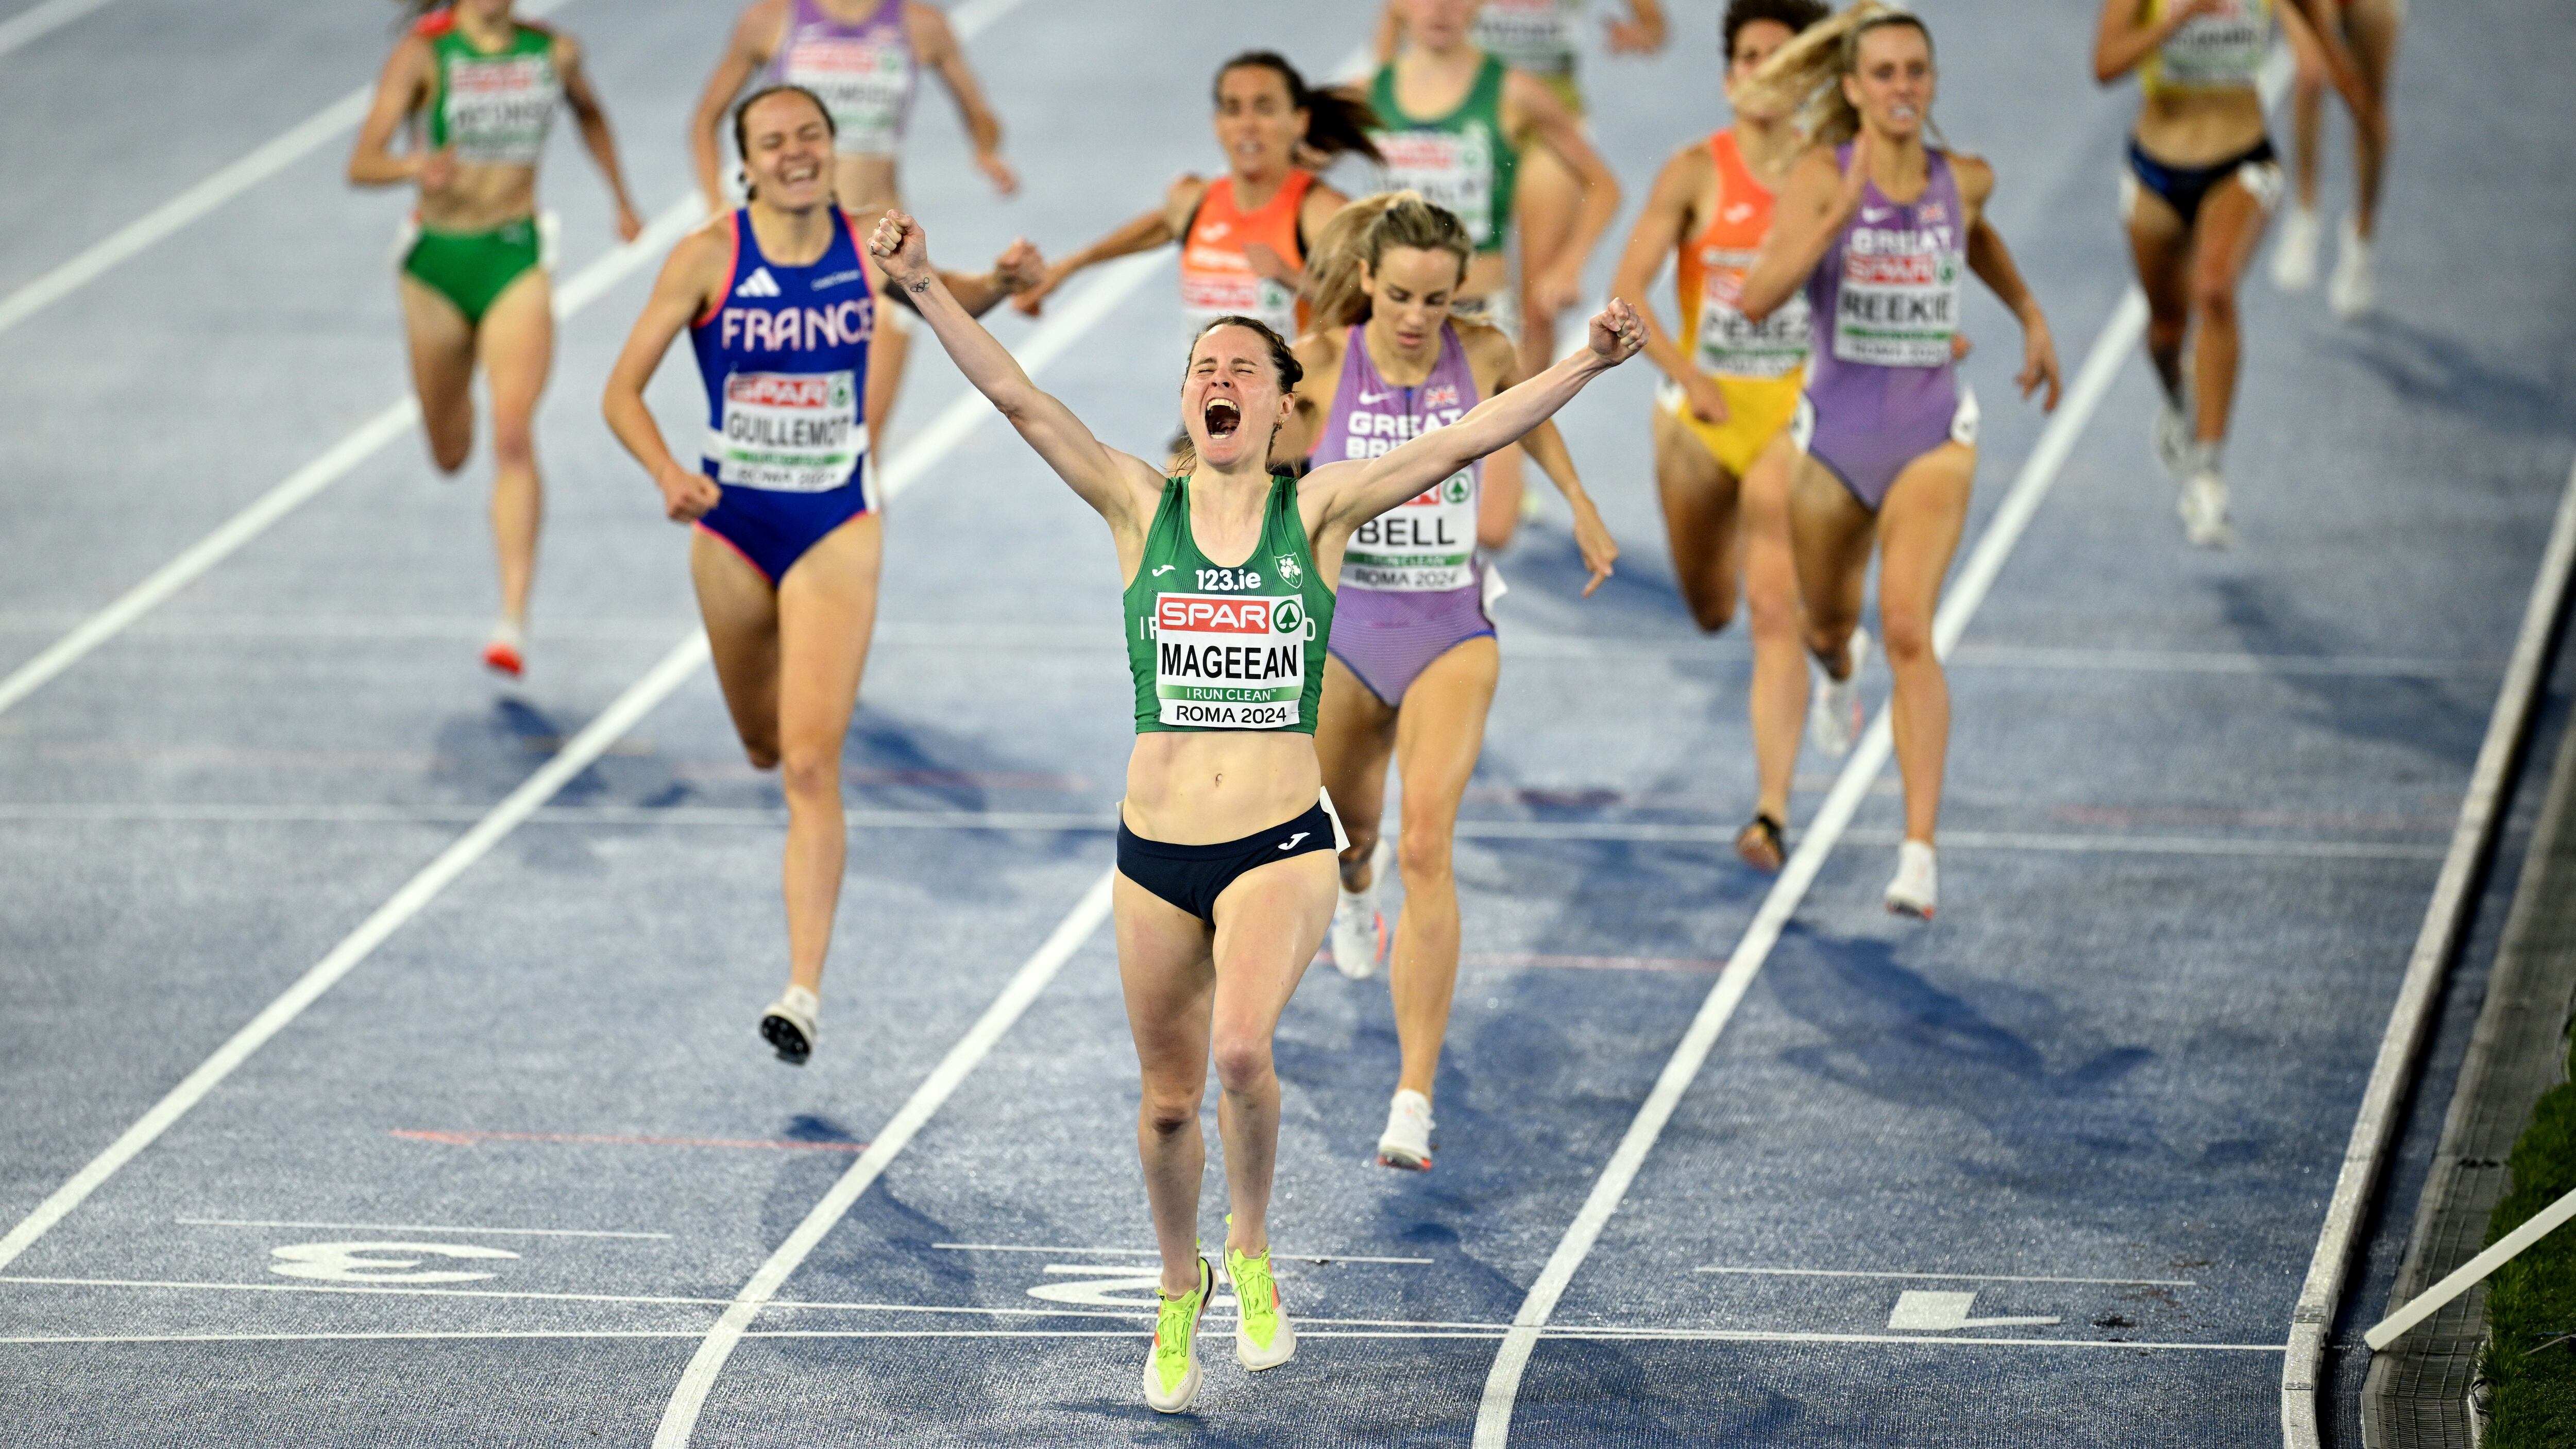 Ciara Mageean celebrates as she crosses the finish line to win the women's 1500m at the European Athletics Championships in Rome. Photo: Matthias Hangst/Getty Images